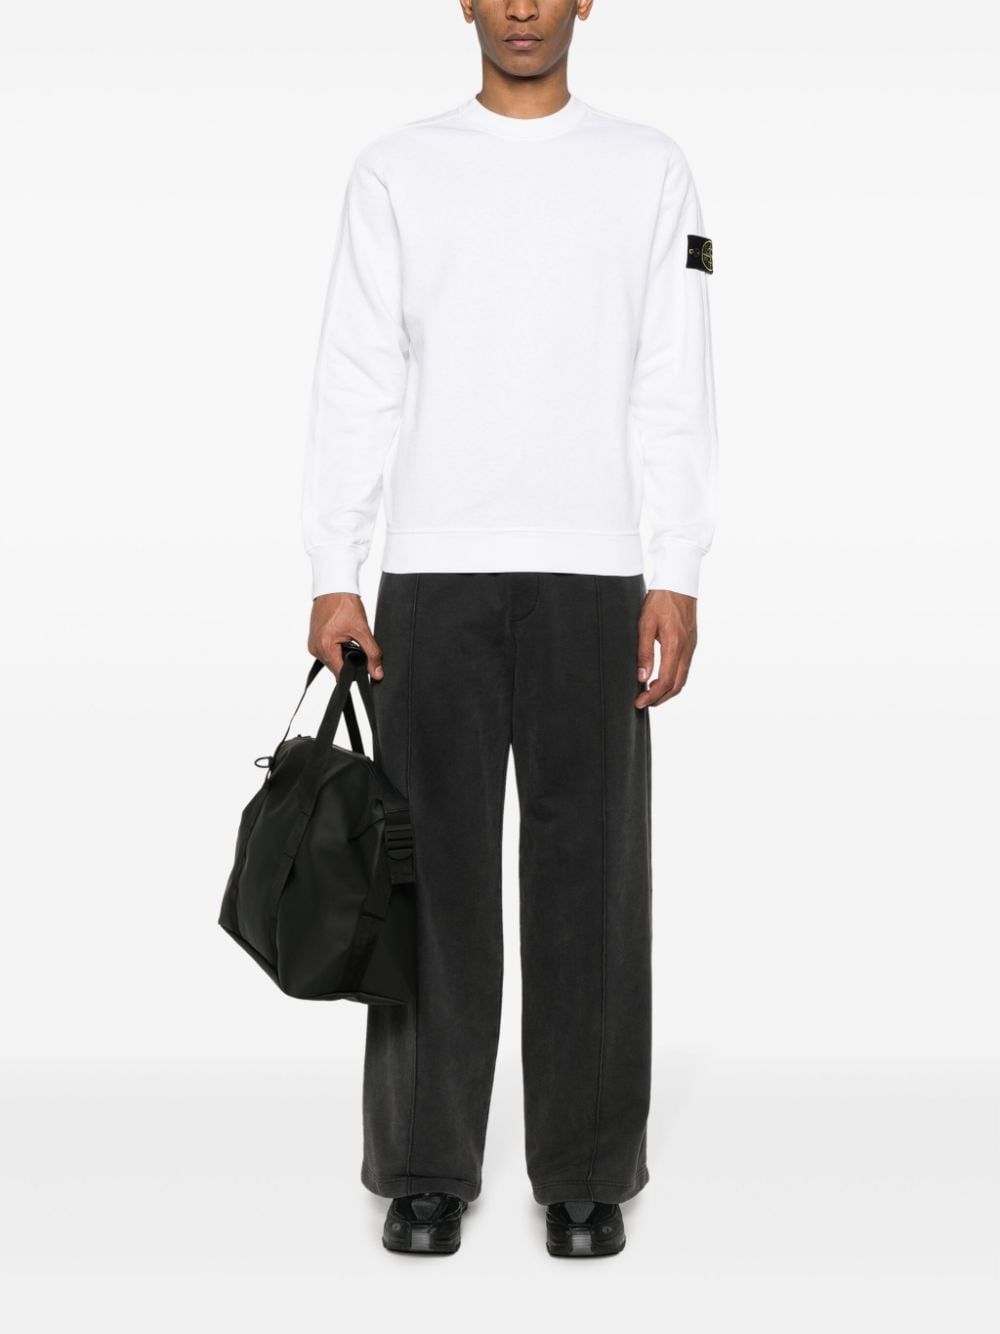 Stone Island - Sweat white 66060 ‘OLD’ TREATMENT - Lothaire